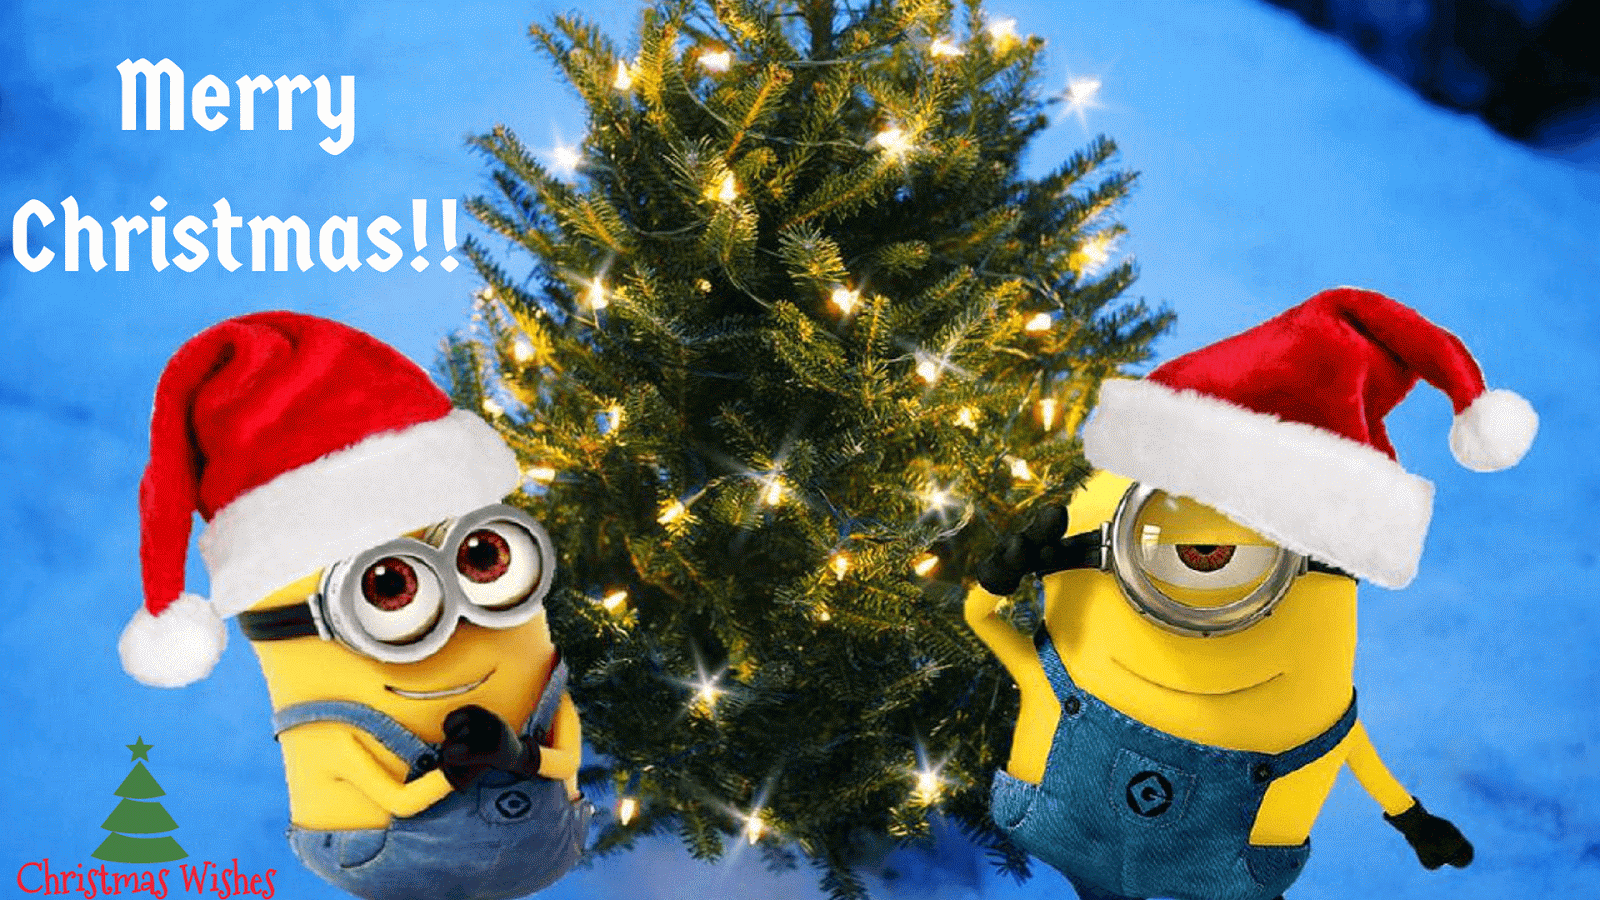 Download free christmas santa minion wallpaper for your mobile. HD